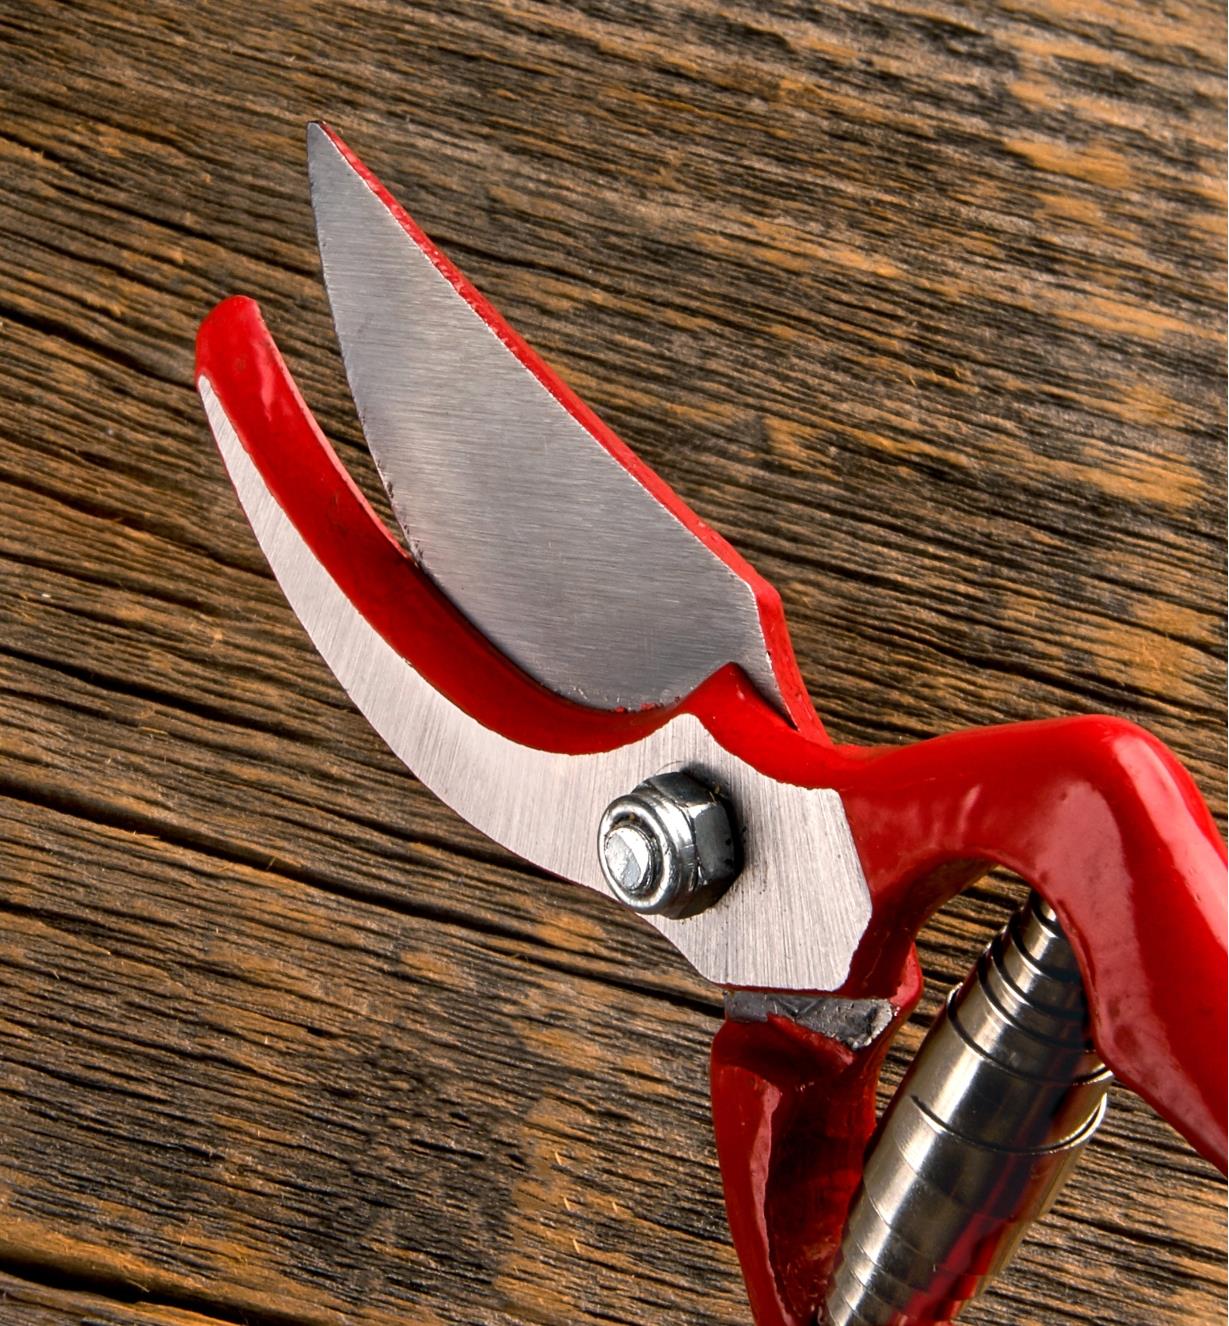 A close-up view of the bypass pruner blade